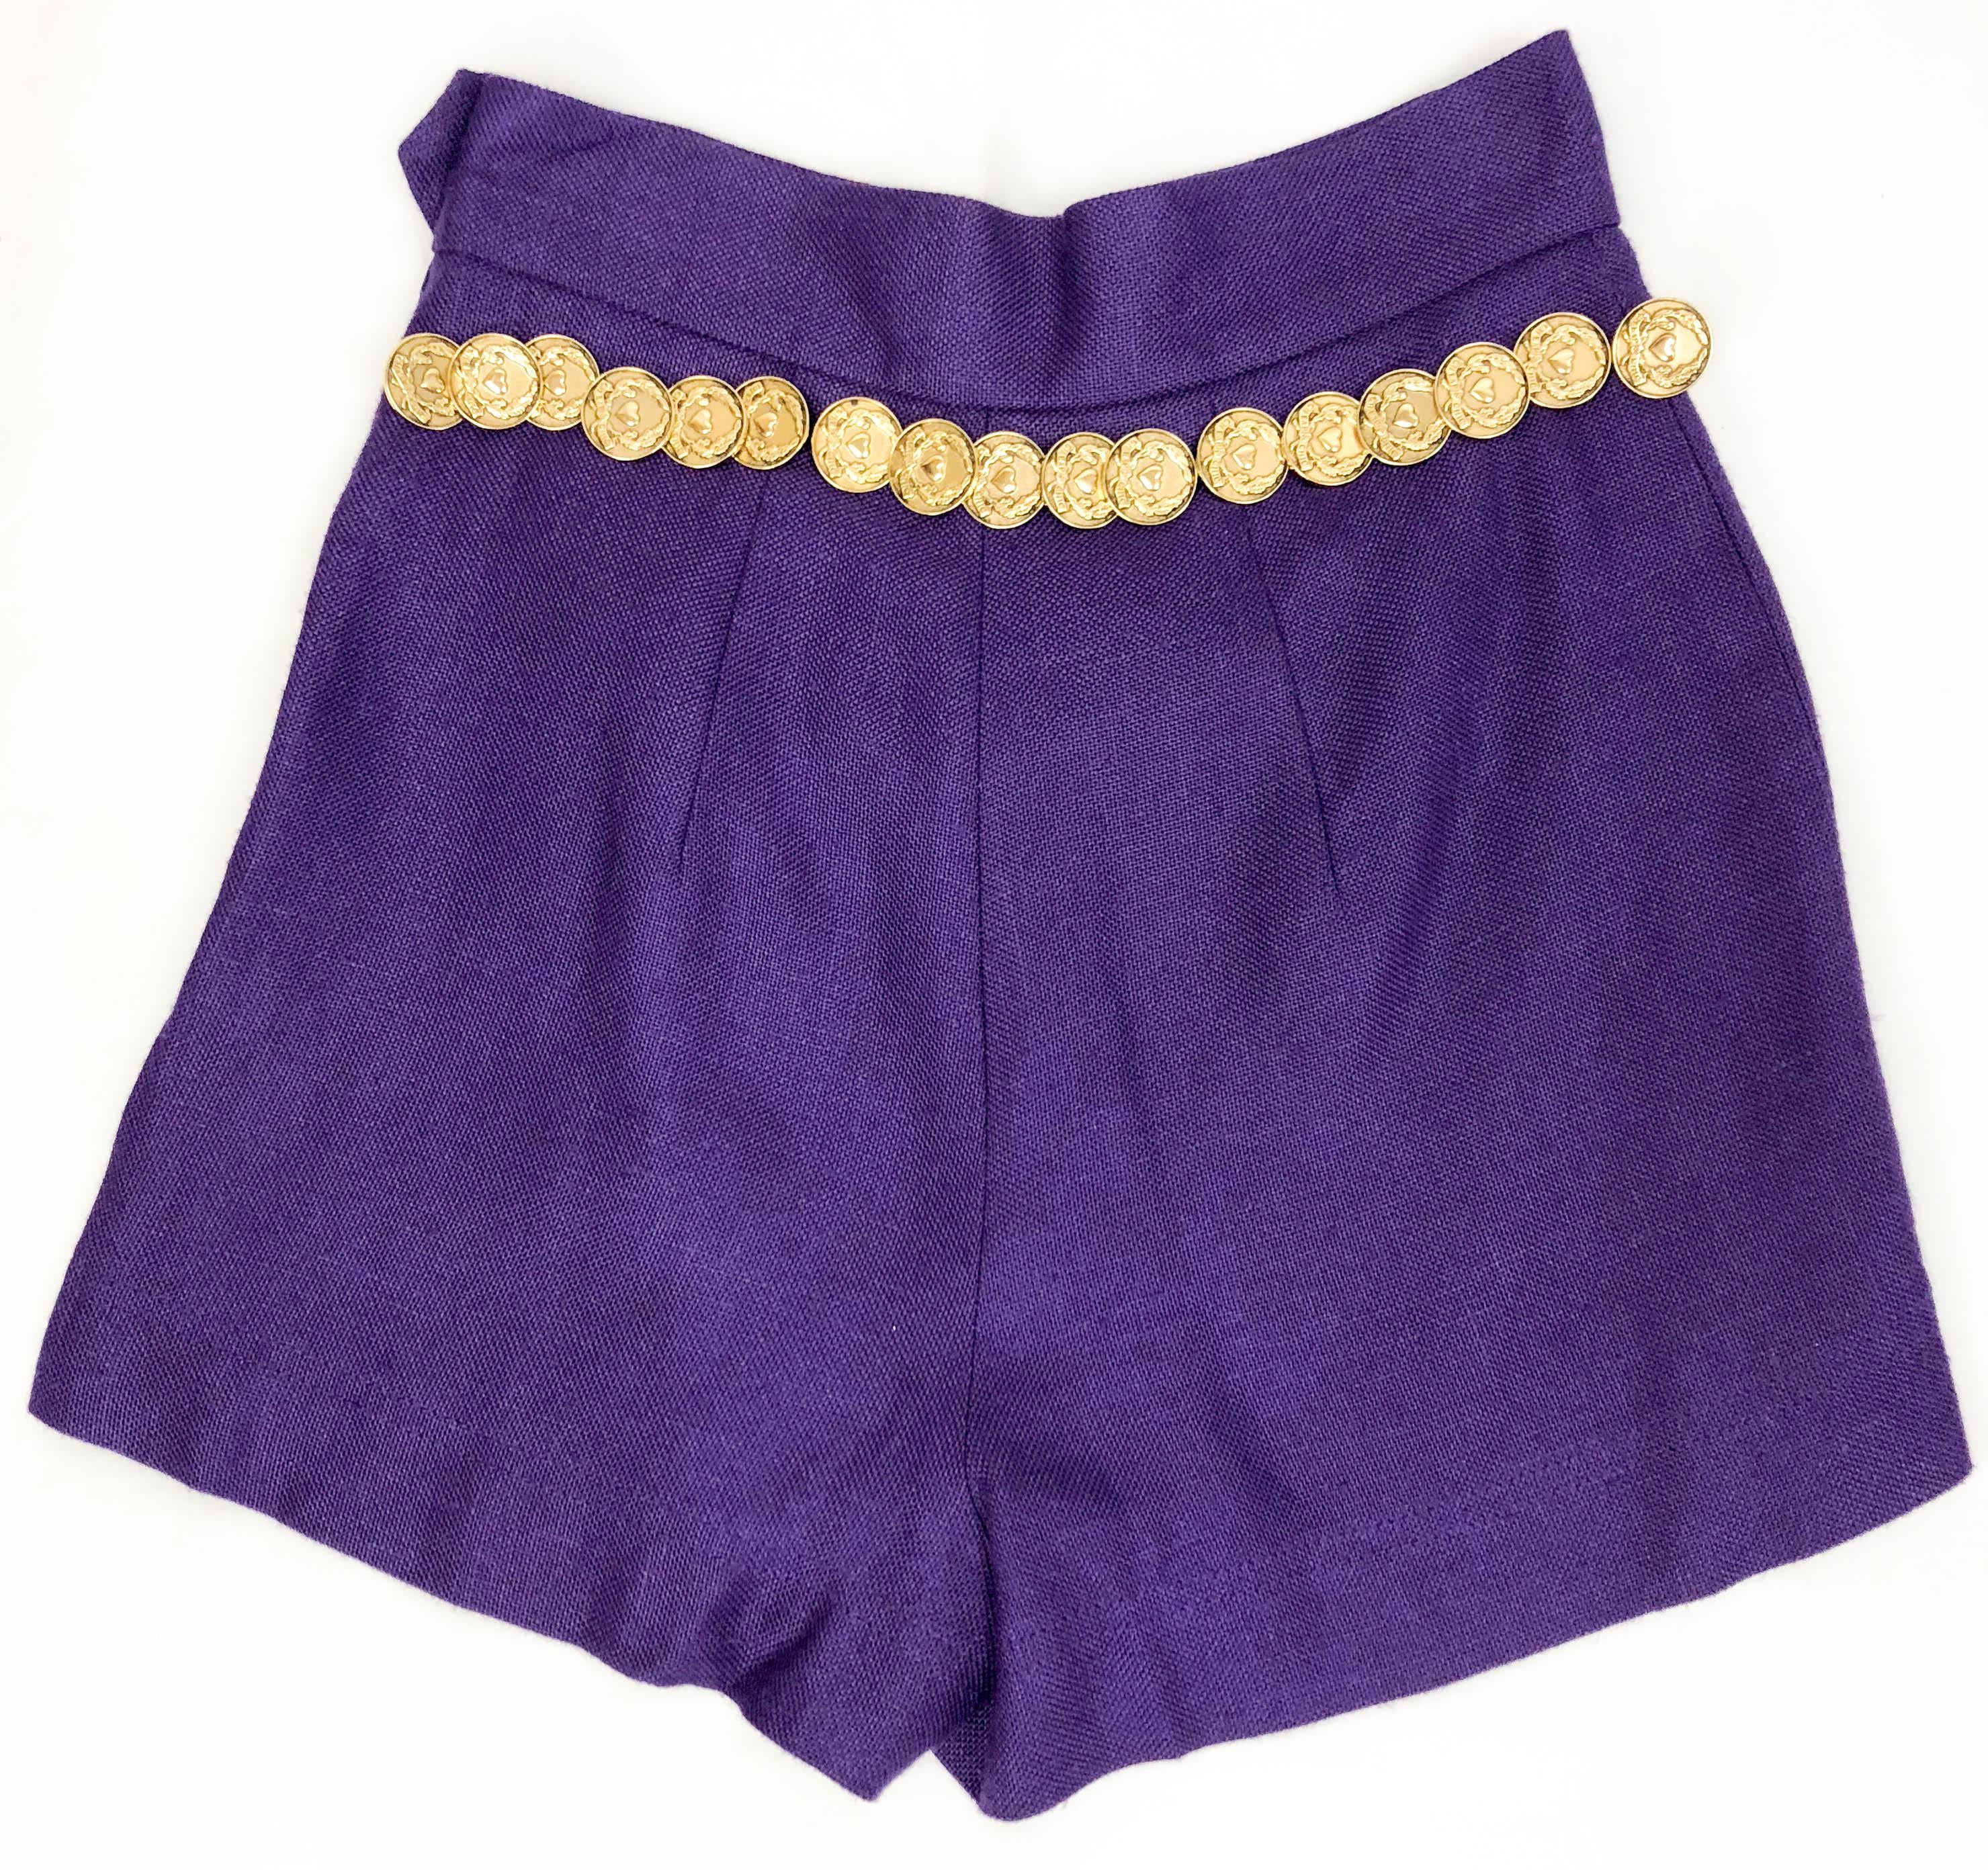 1990's Moschino Royal Purple Linen Shorts With Attached Gilt Coin Belt For Sale 2